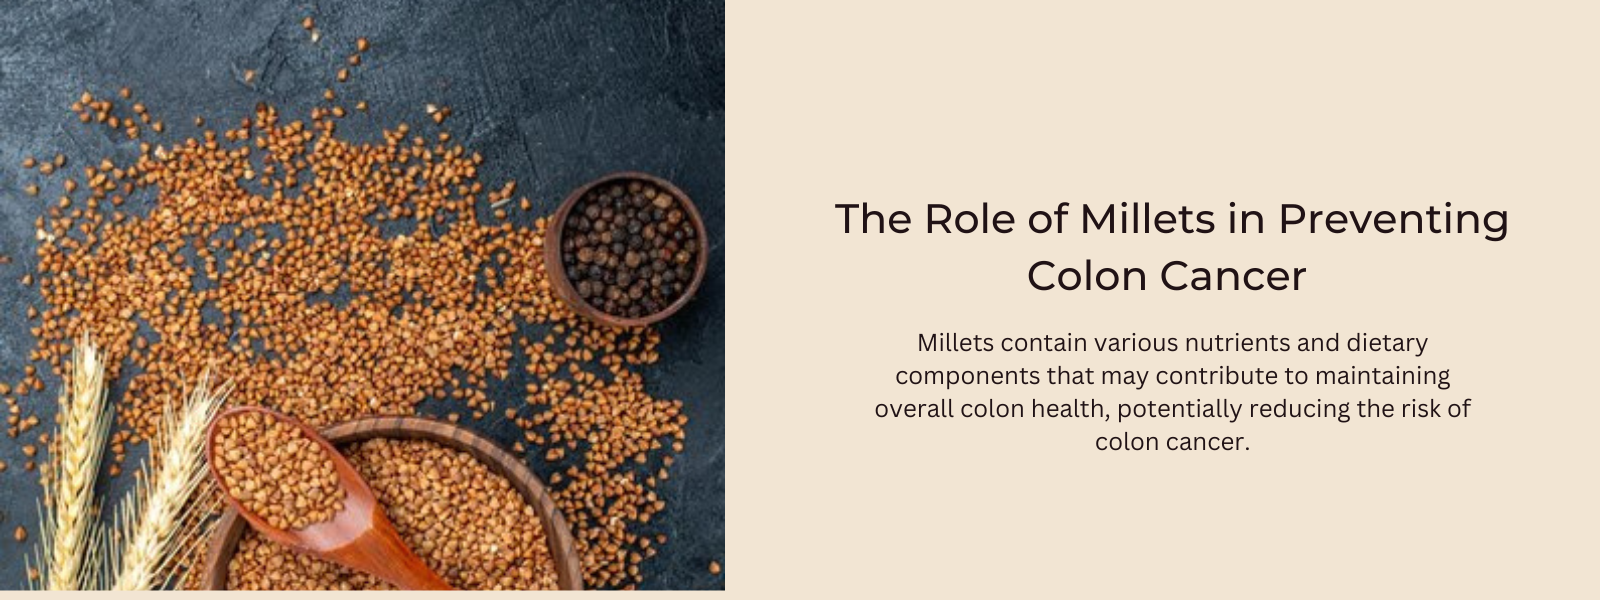 The Role of Millets in Preventing Colon Cancer